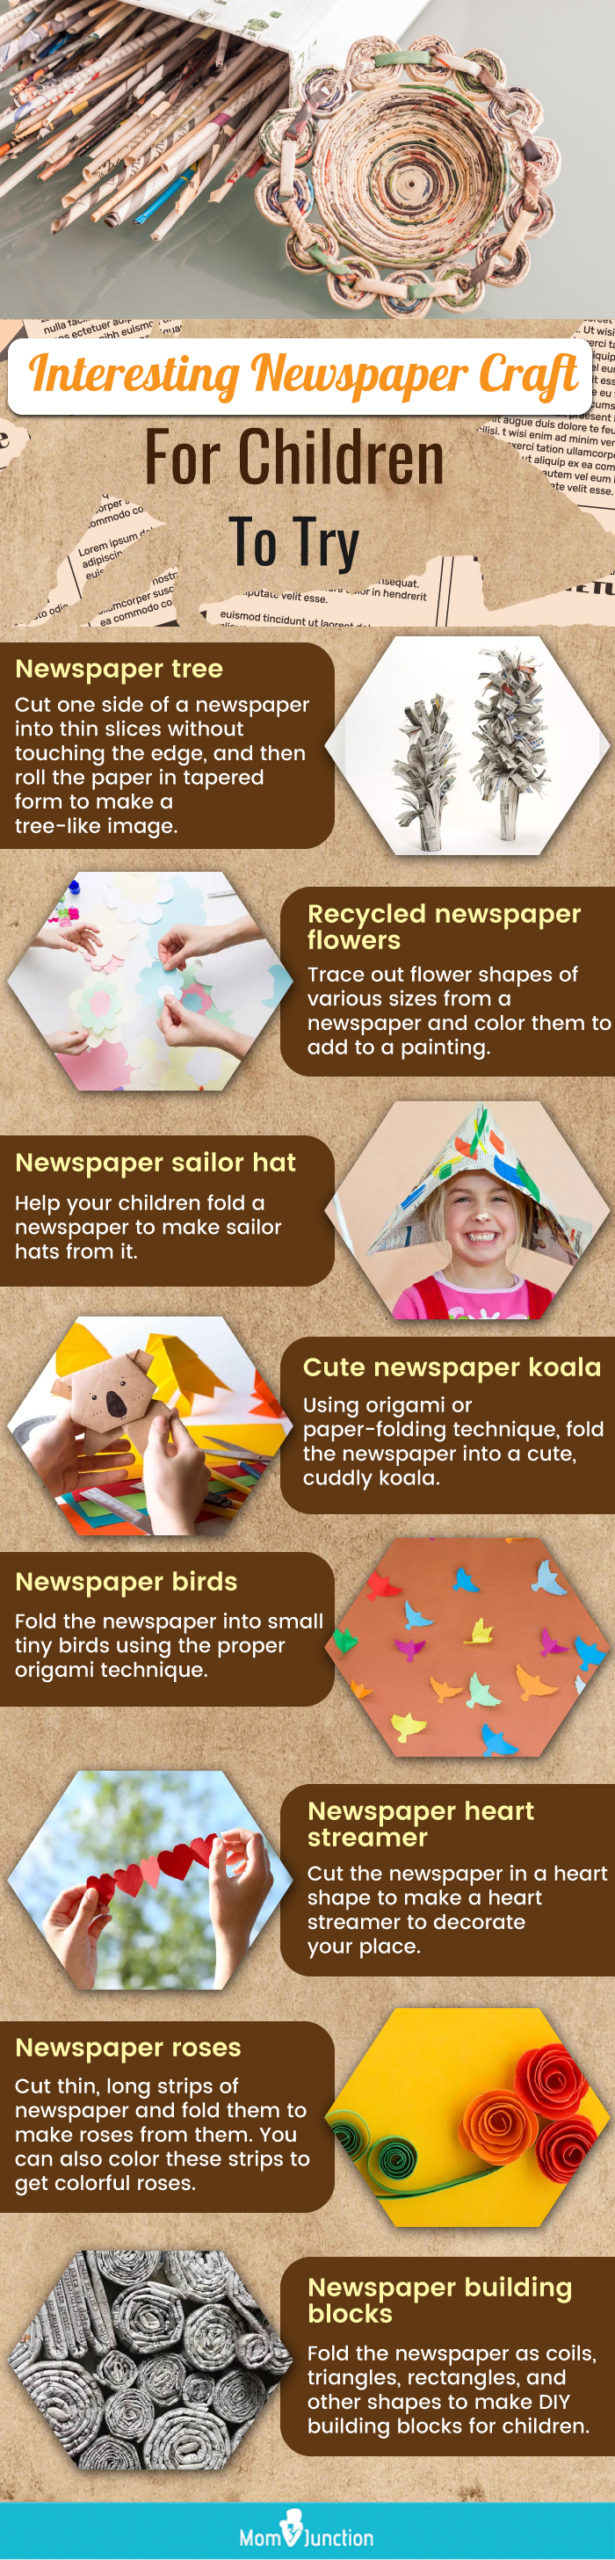 interesting newspaper crafts for children to try (infographic)